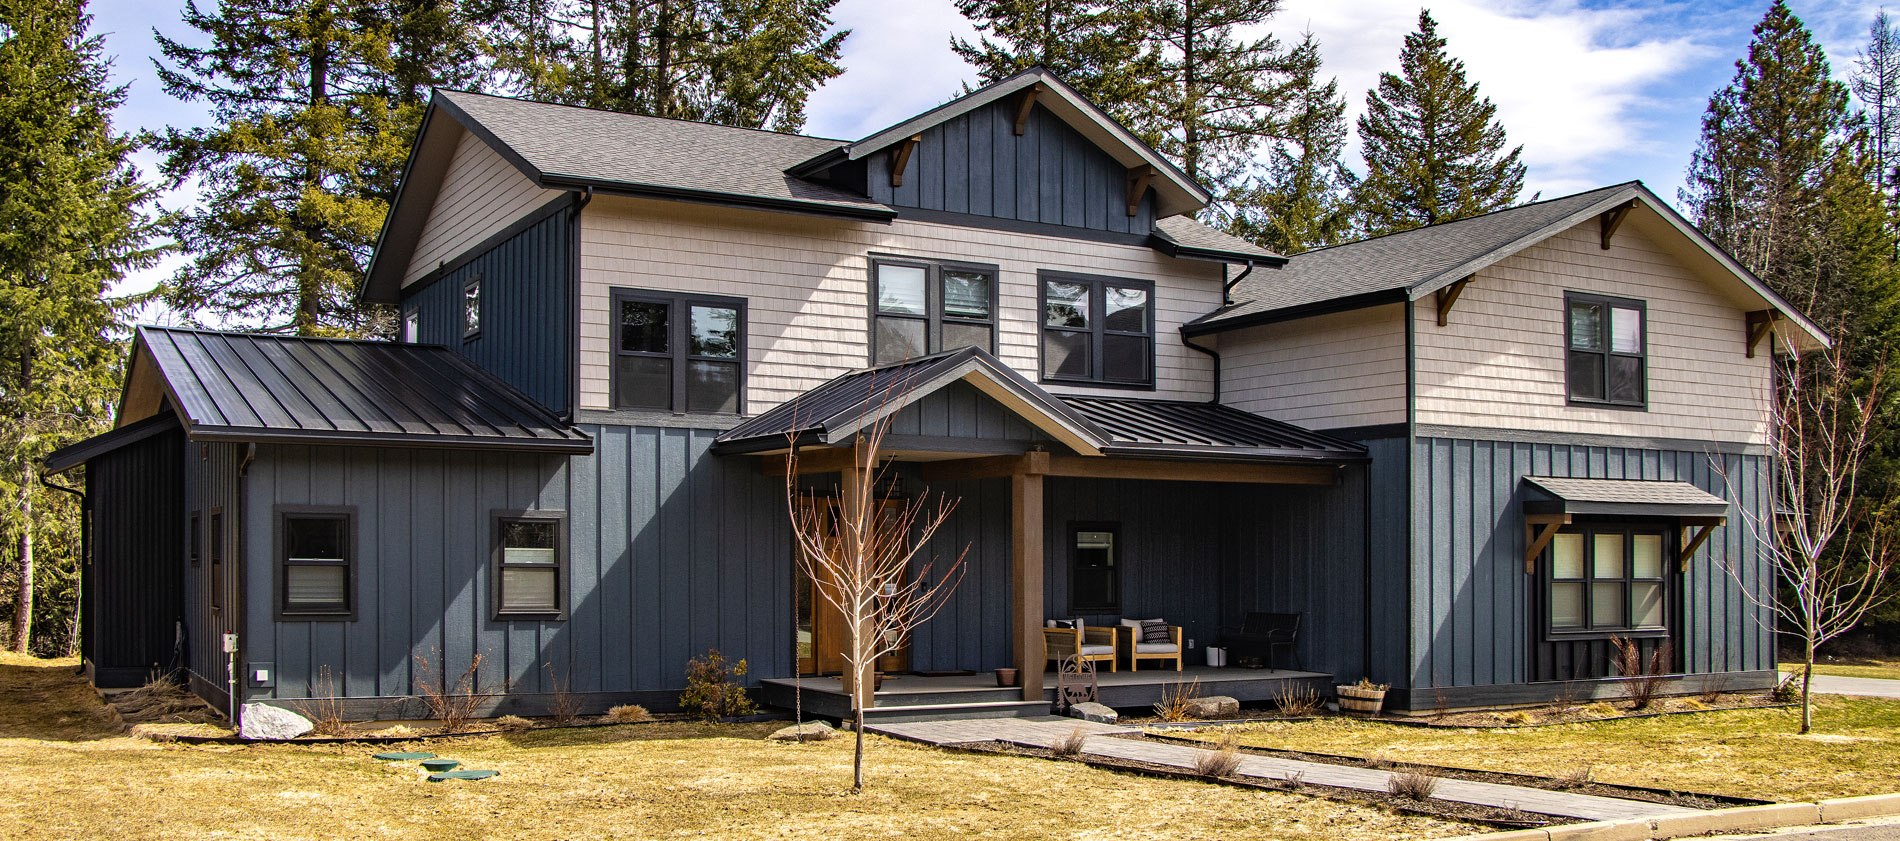 Do not miss this special one of a kind IDAGON 2020 CUSTOM BUILT HOME in Canoe Cove just minutes from Downtown Sandpoint, Idaho